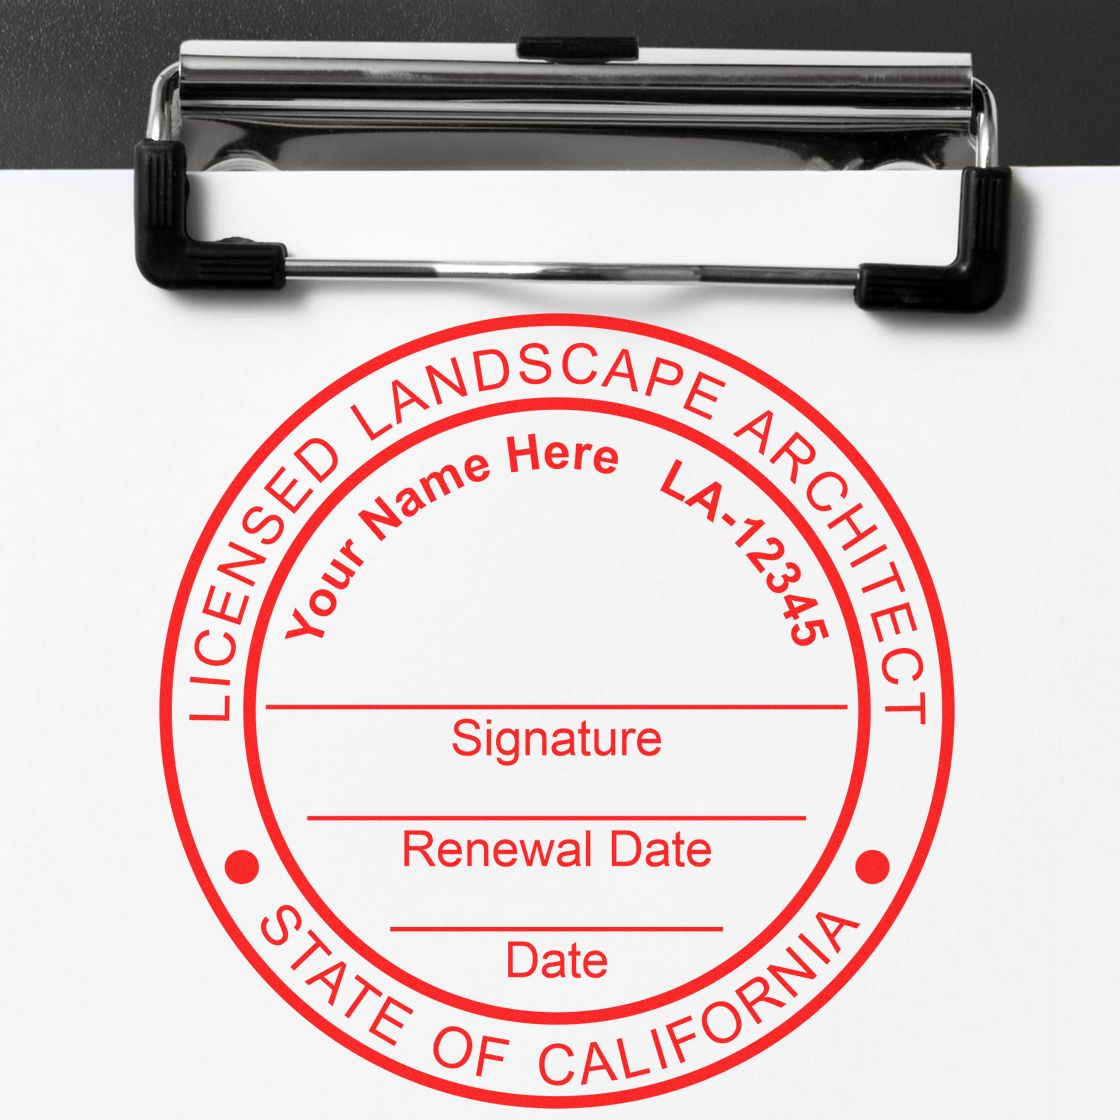 Power and Prestige: Obtaining the California Landscape Architect Stamp Feature Image